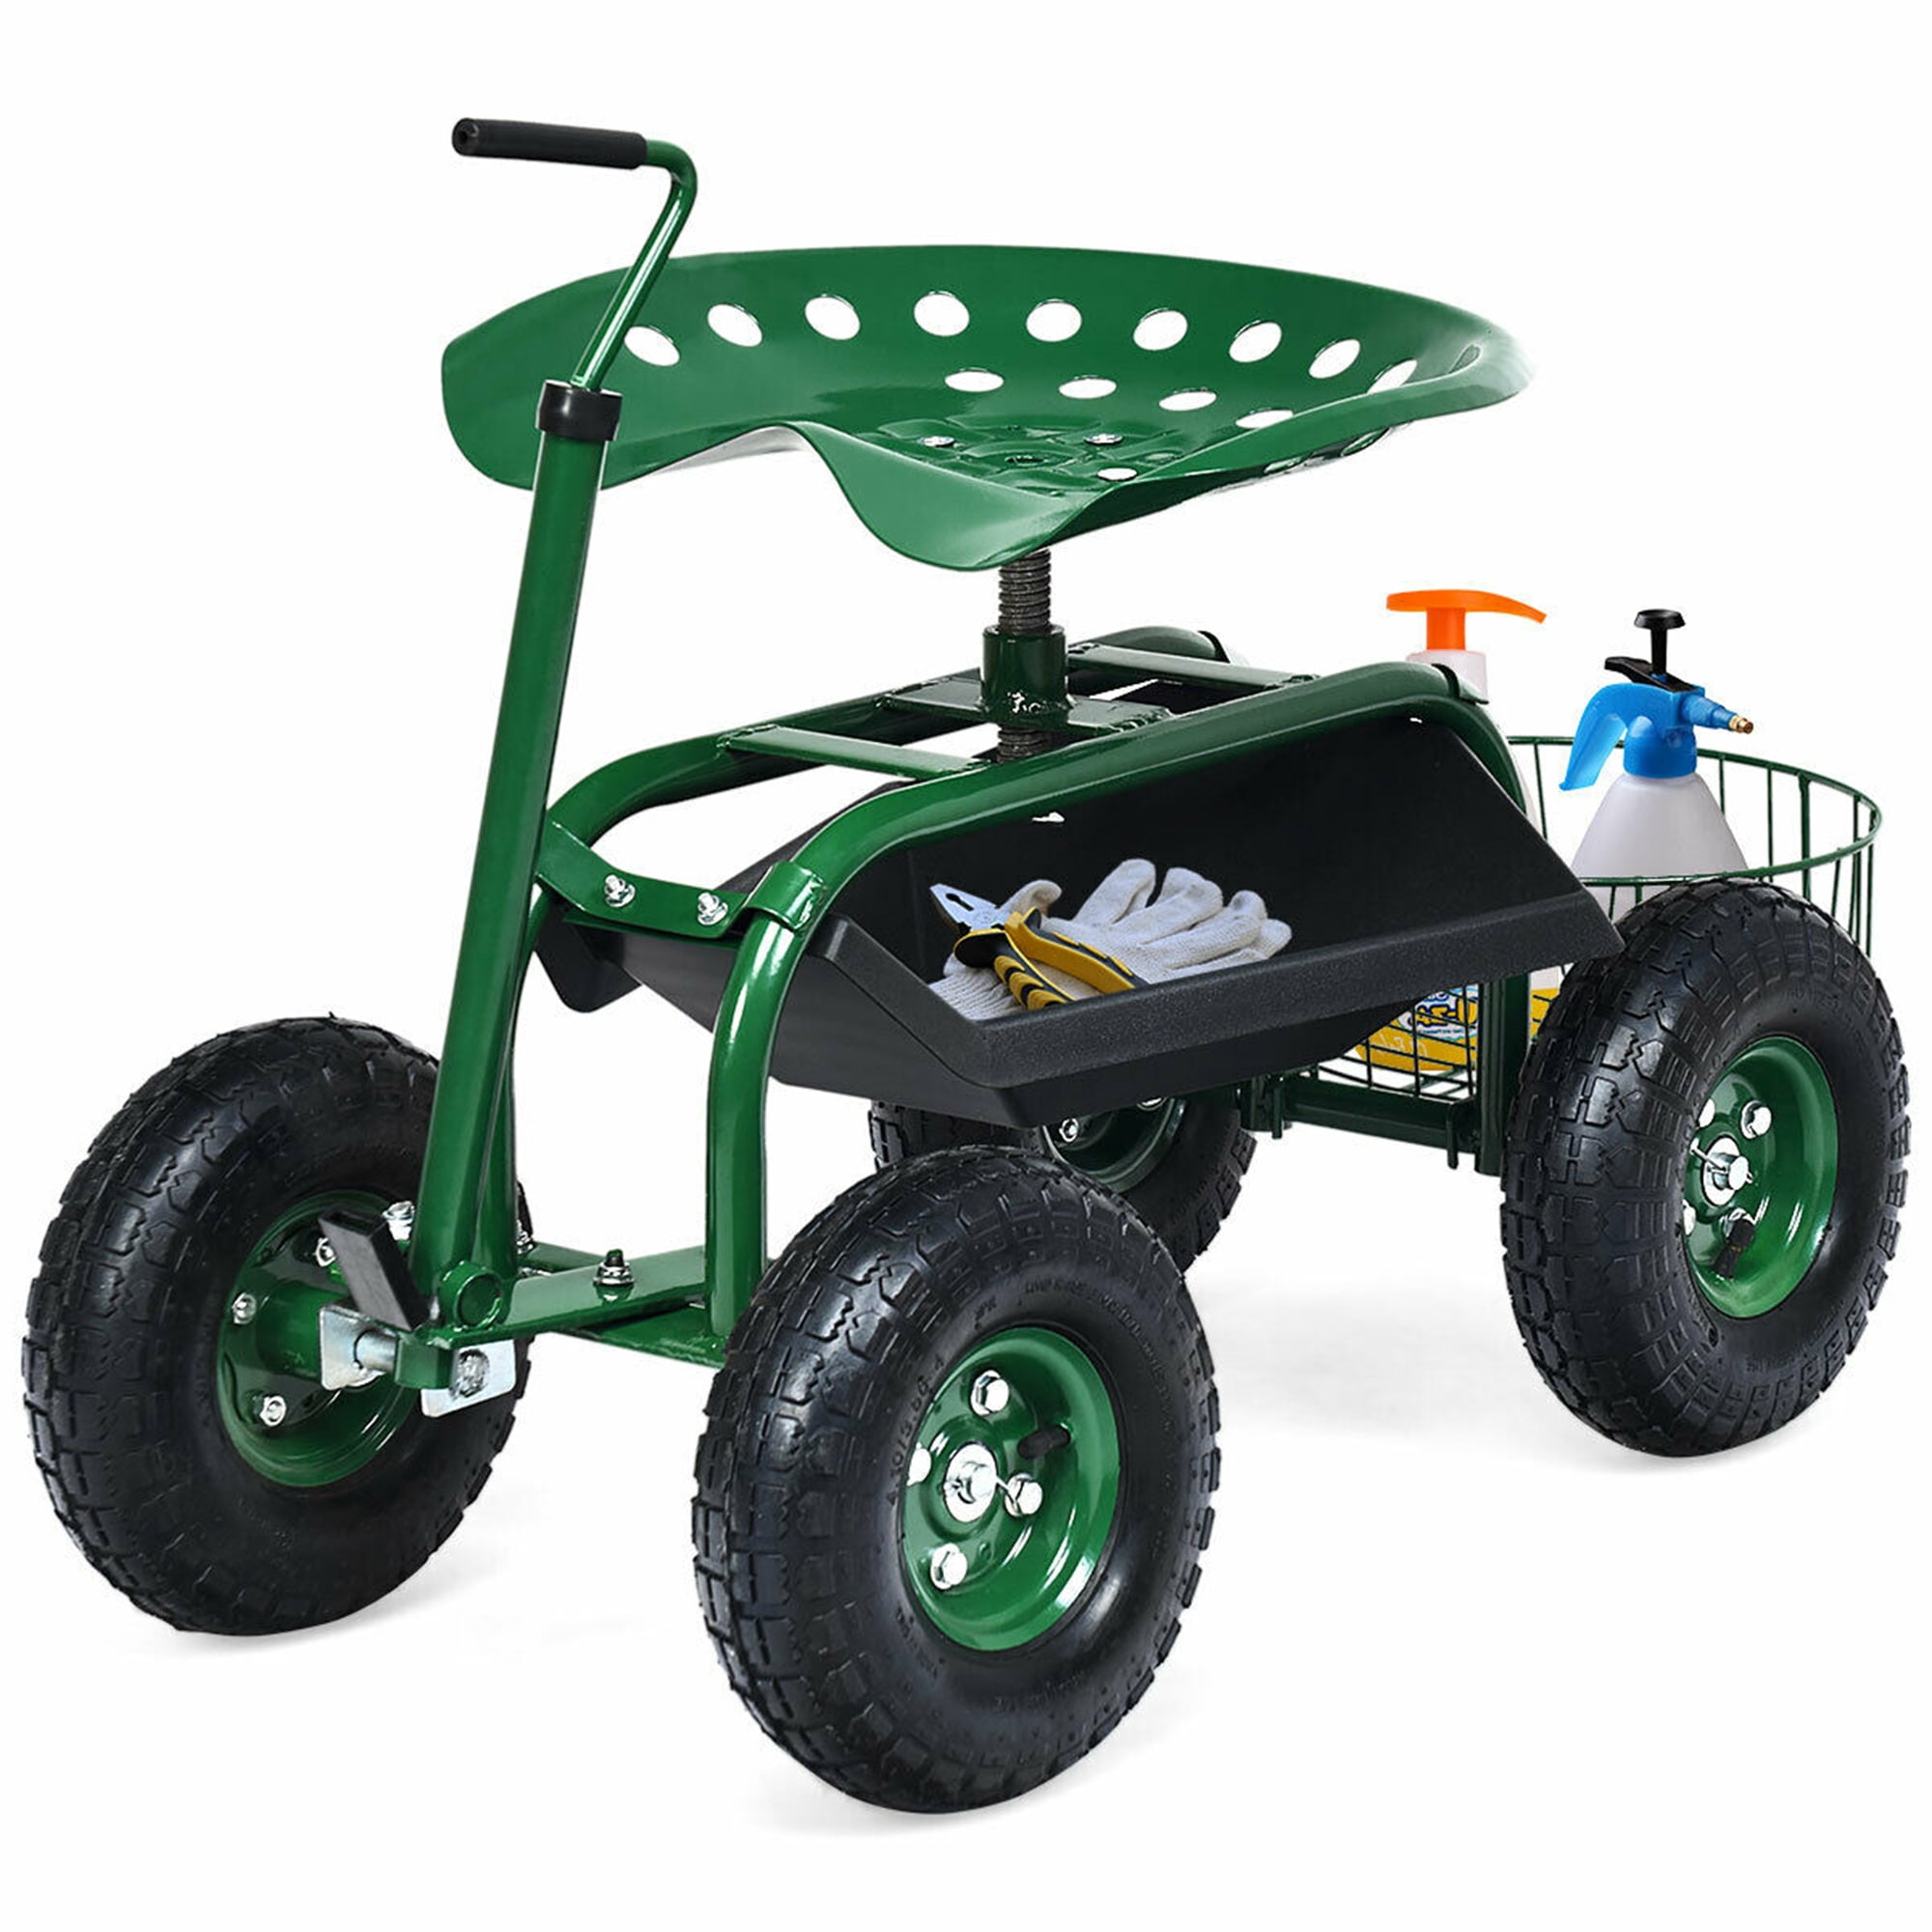 Kinlife Garden Cart Rolling Work Seat Patio Wagon Scooter for Planting with Utility Tool Tray and Basket Green 